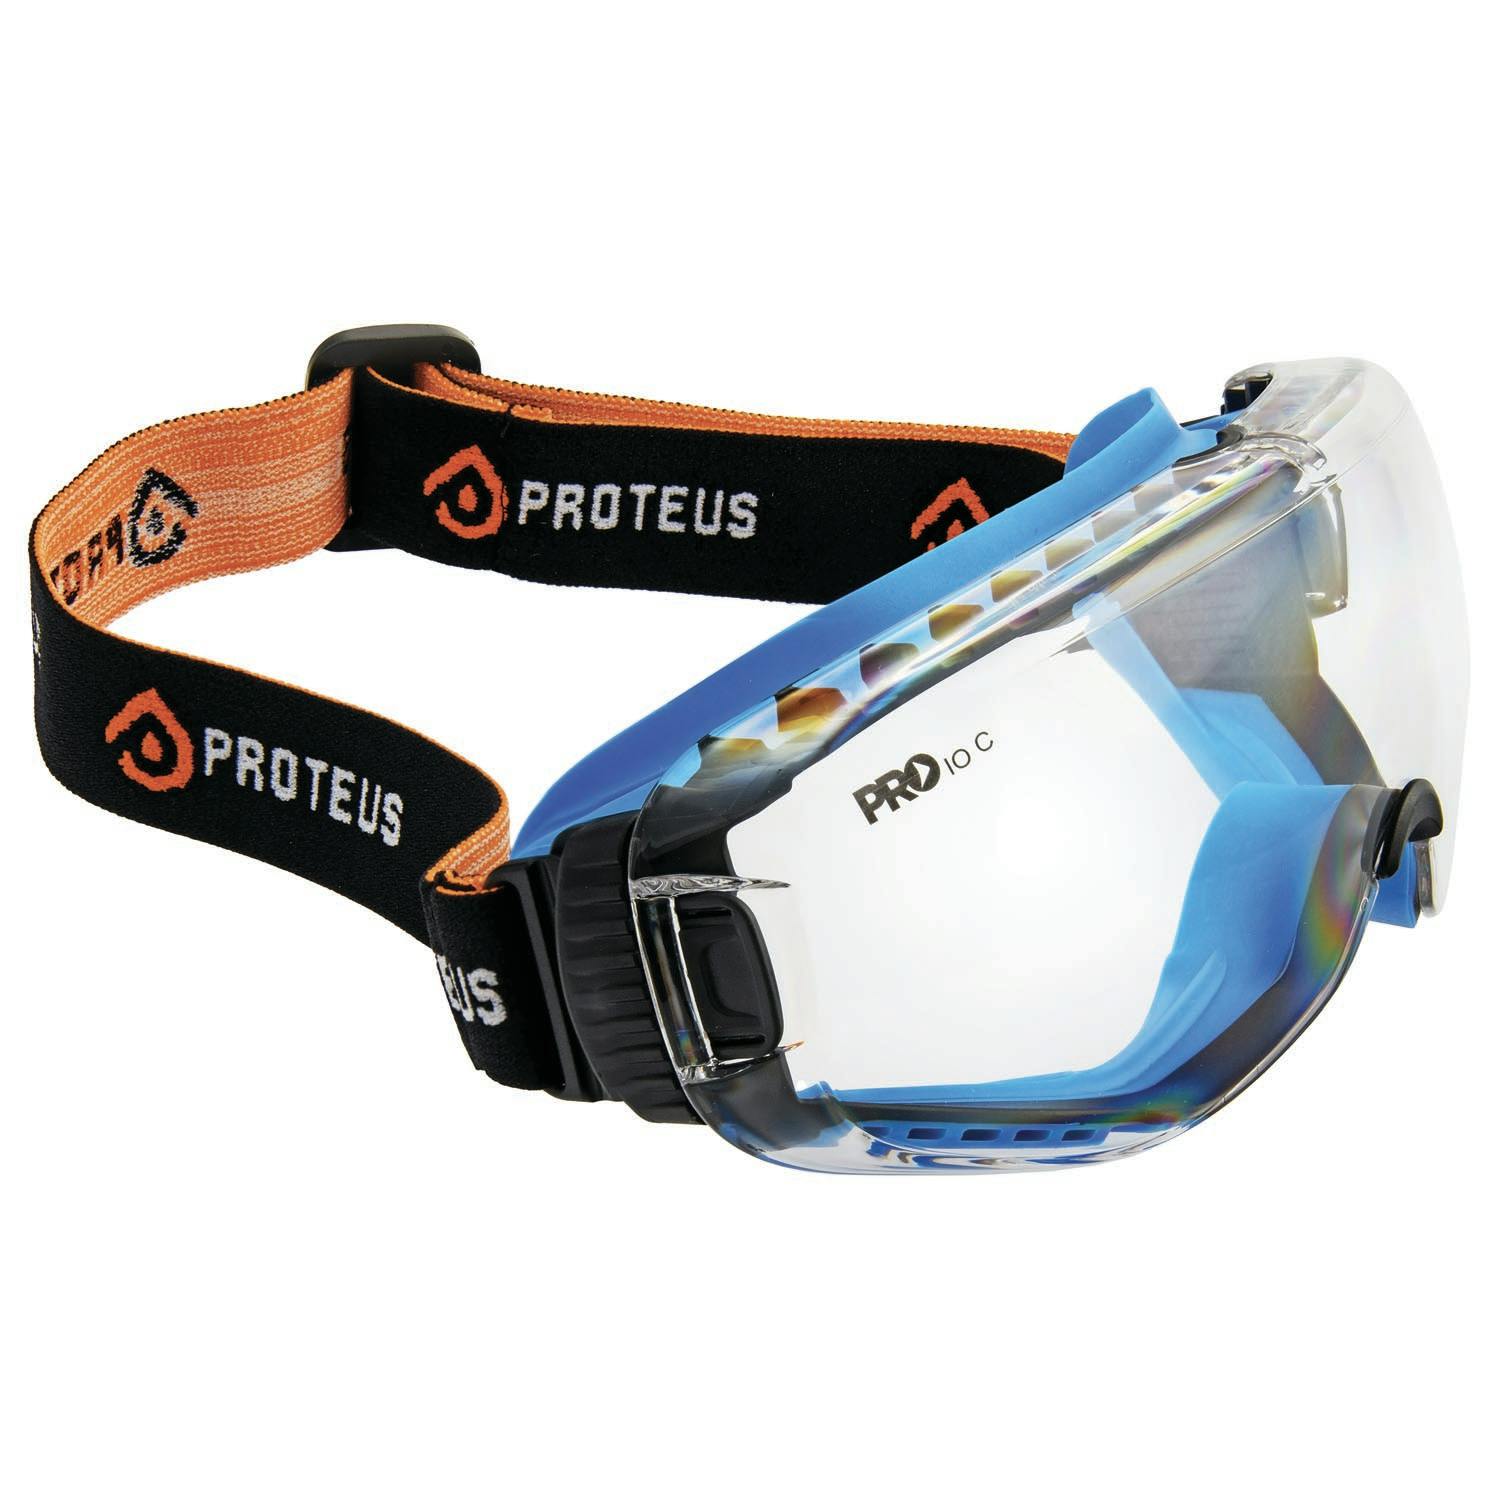 Proteus G1 Safety Goggles